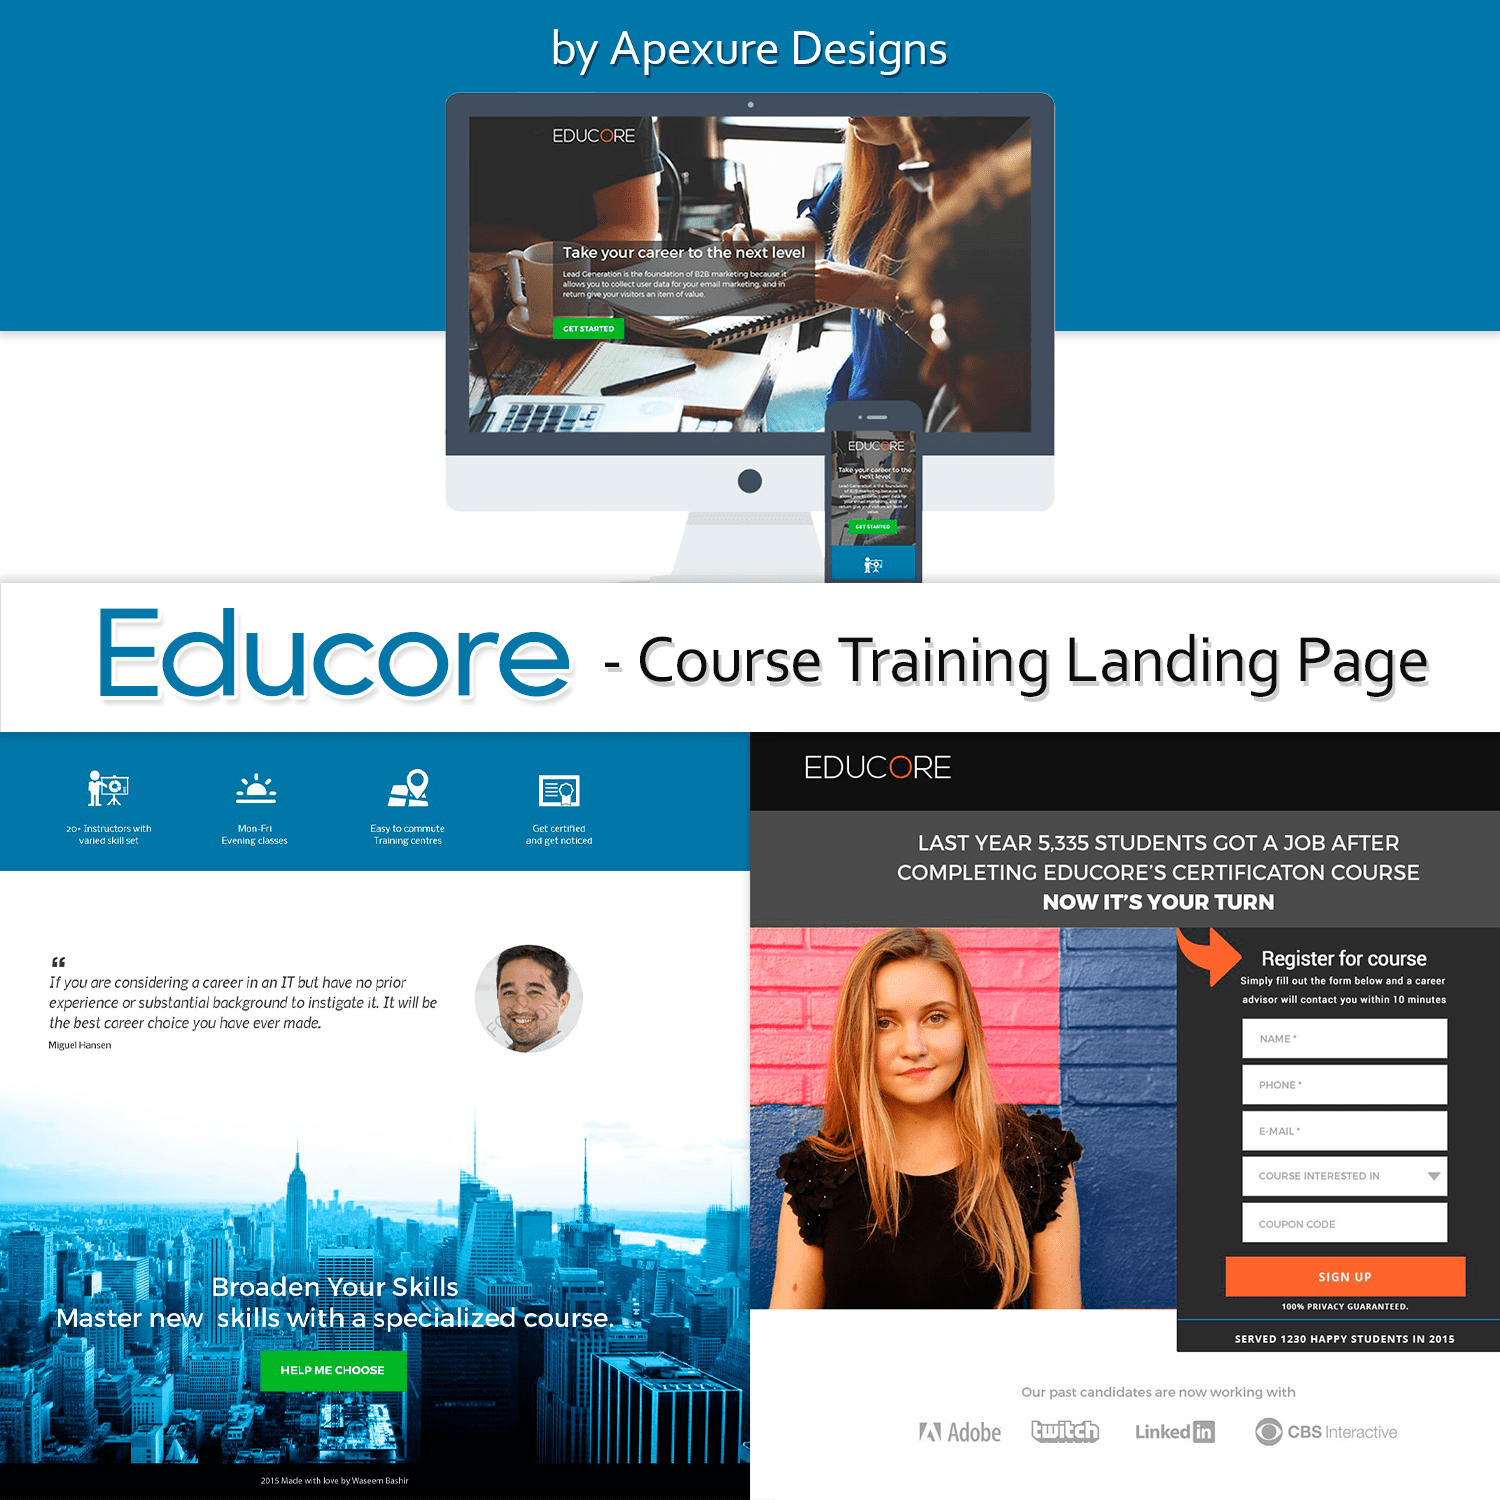 Educore Course Training Landing Page cover.